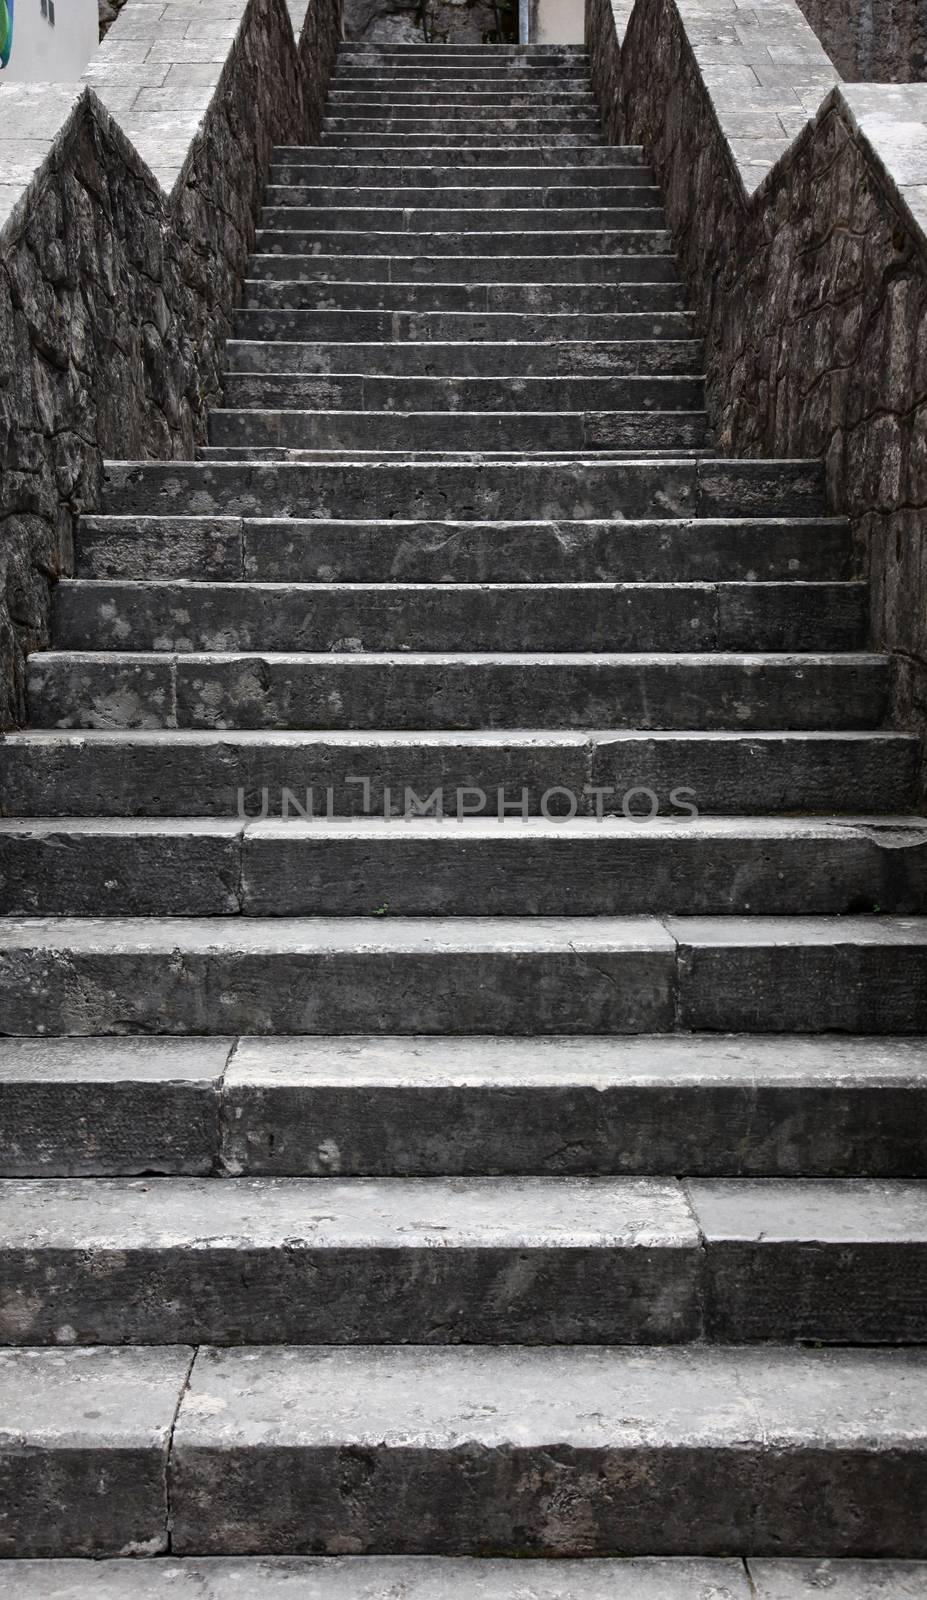 Stairs in the old town of Kotor on Adriatic coast of Montenegro.